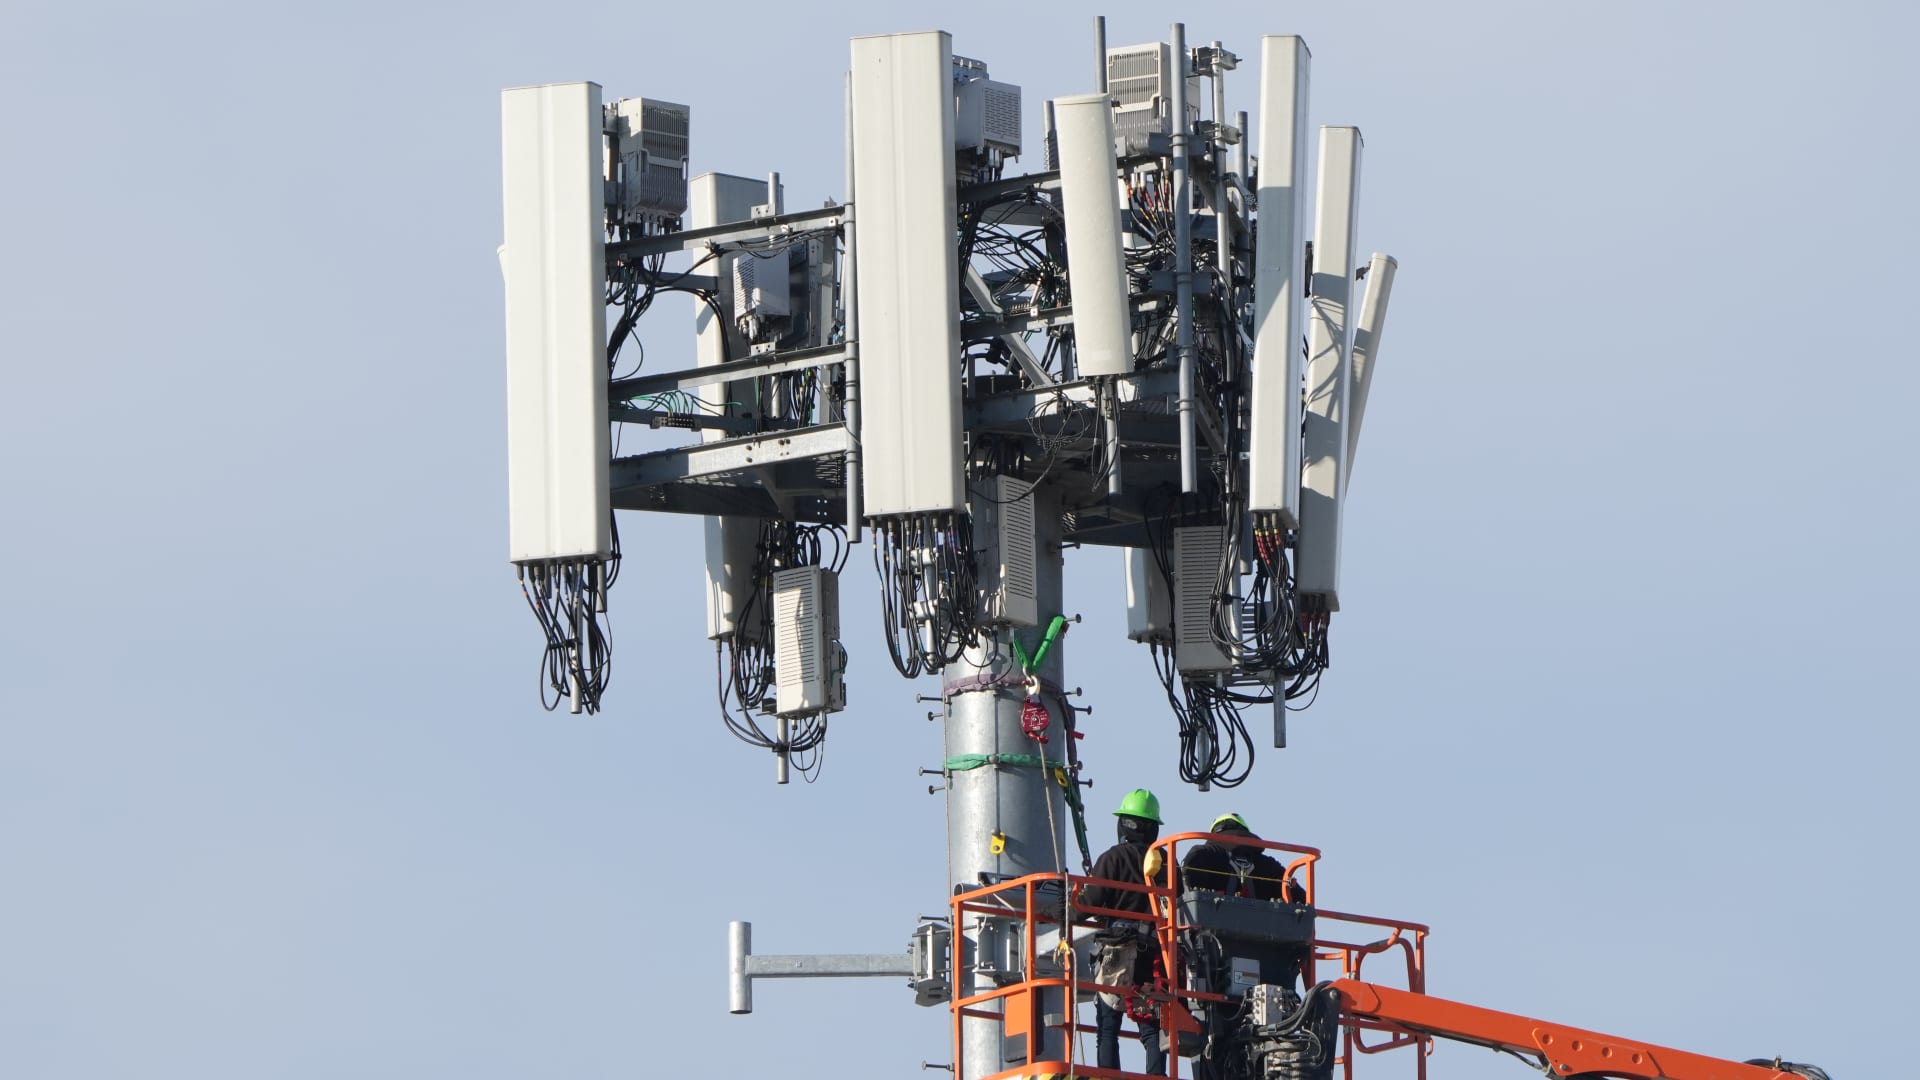 Workers install equipment on a 5G cell tower in Salt Lake City, Utah, U.S., on Tuesday, Jan. 11, 2022.